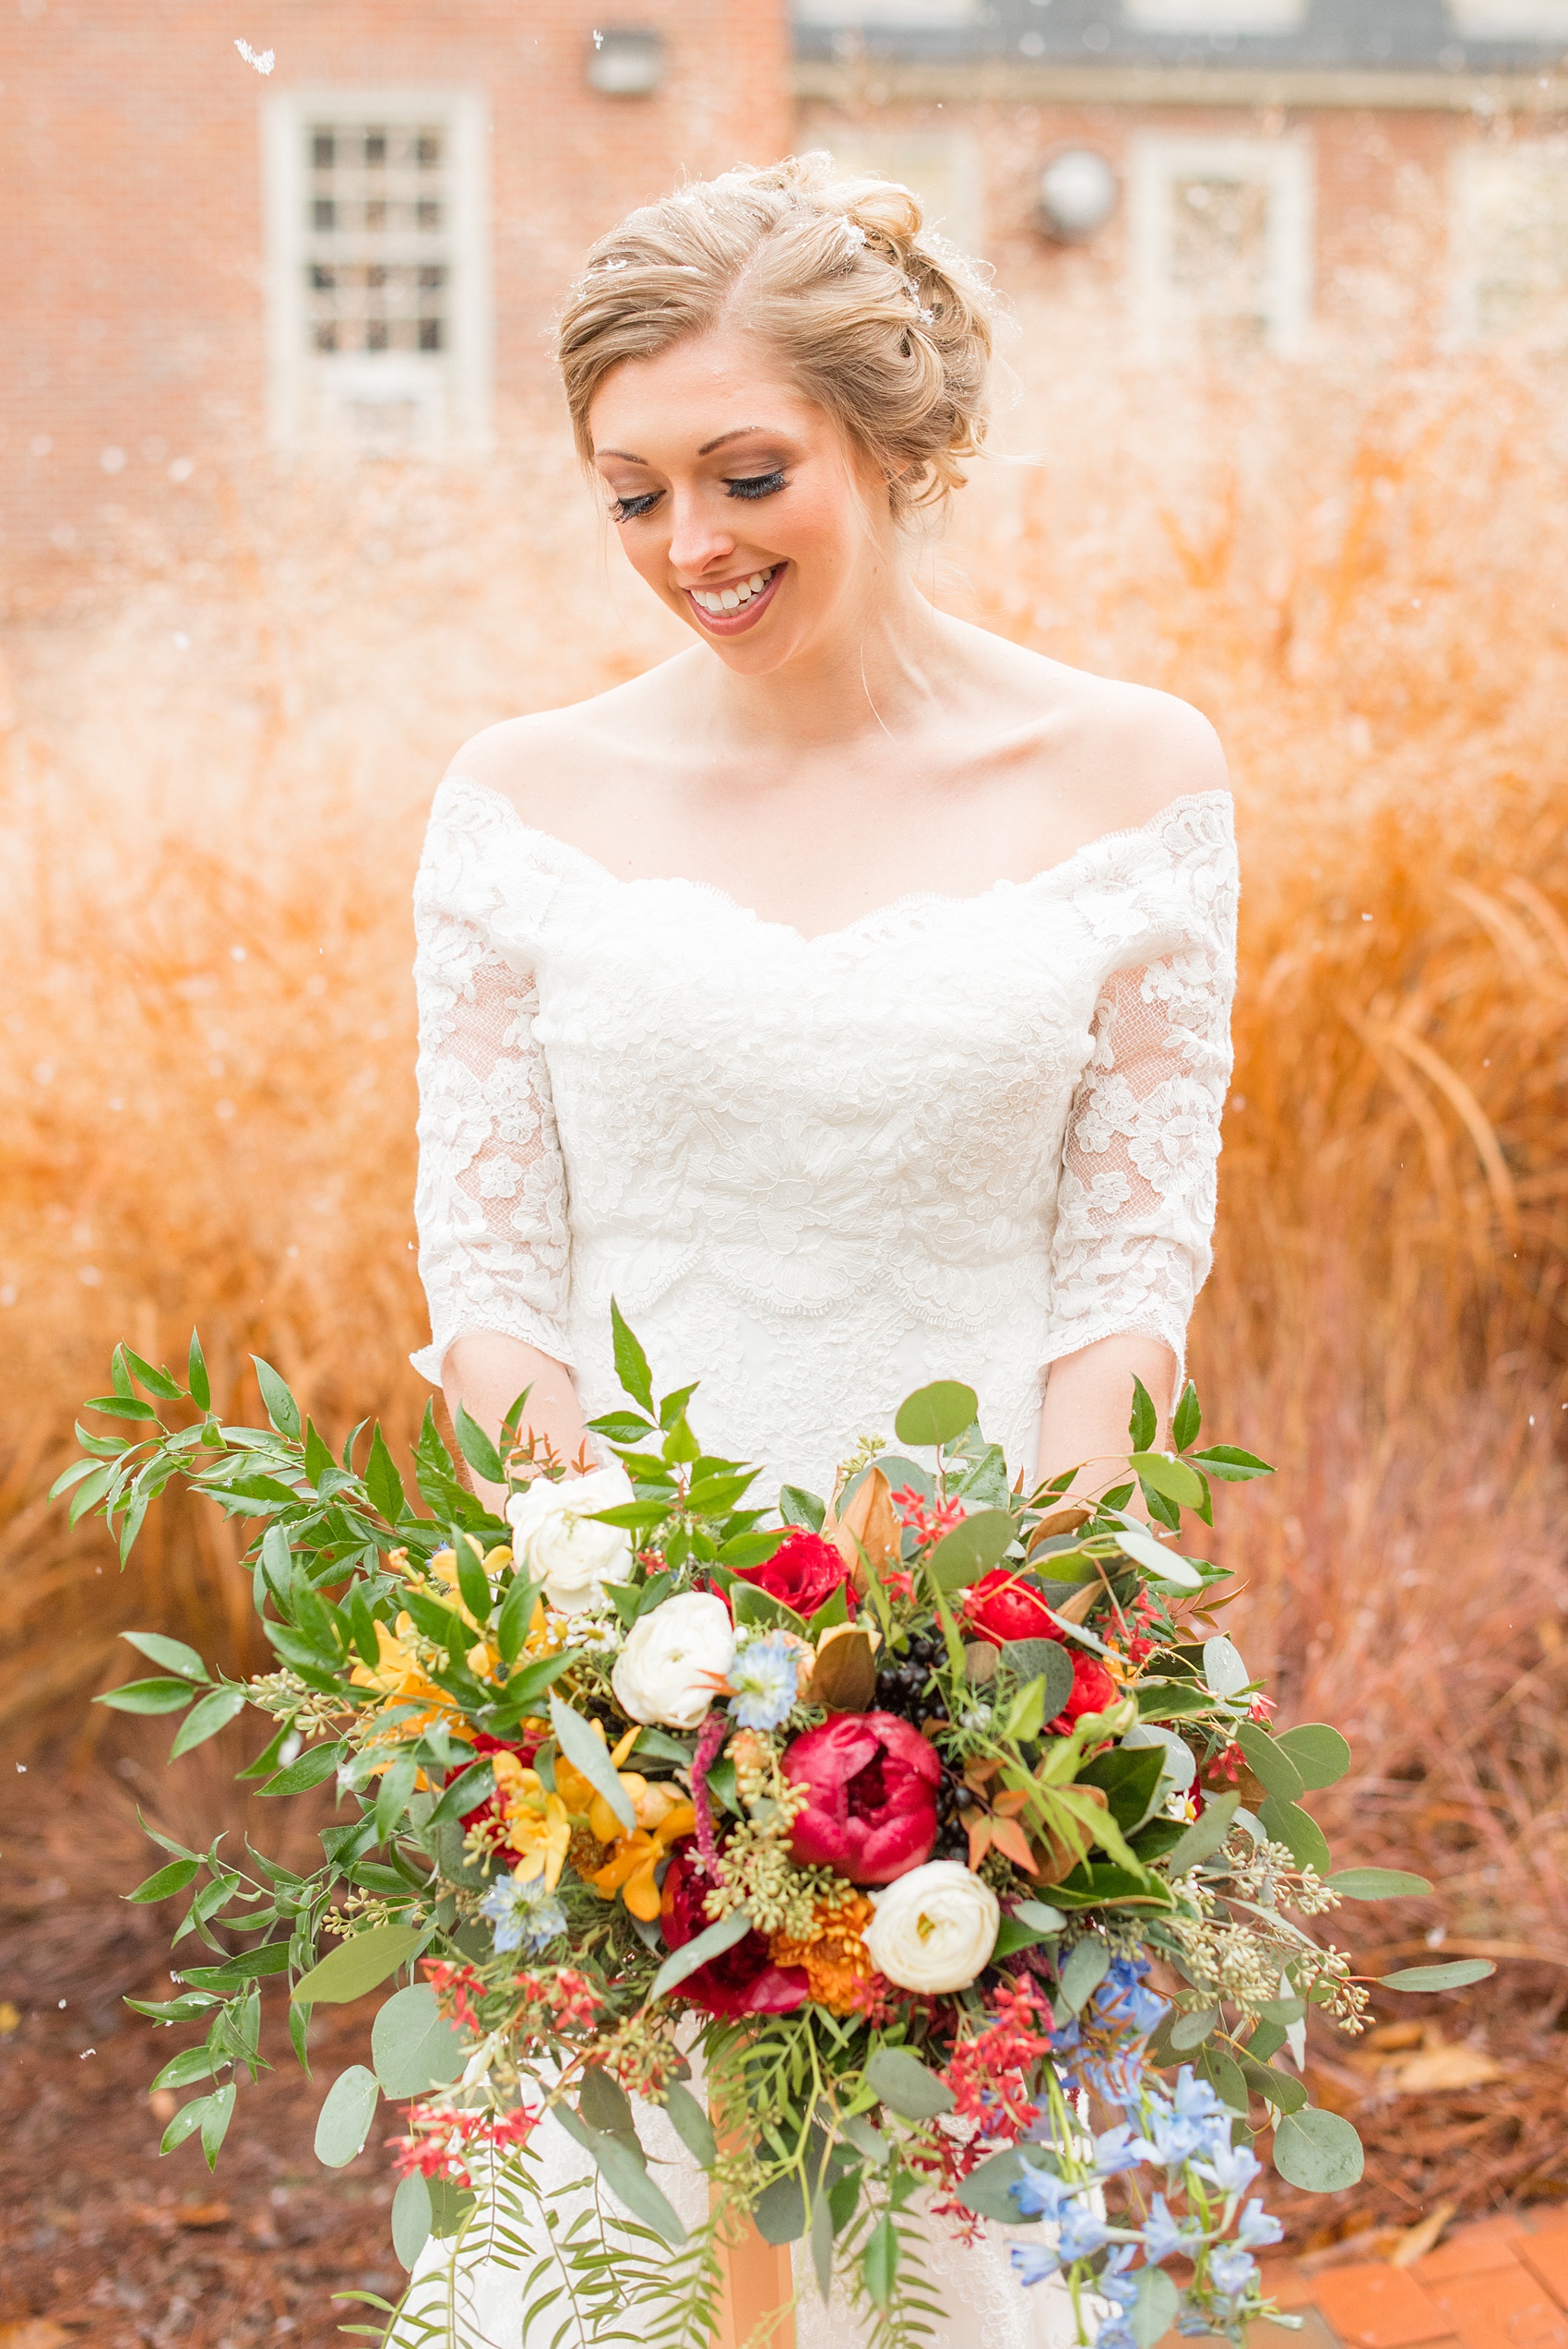 Beautiful wedding photos at The Carolina Inn at Chapel Hill, North Carolina by Mikkel Paige Photography. Detail photo of the bride's bouquet with fall and winter flowers, with burgundy peonies, cascading fern, white ranunculus and orange orchids created by English Garden. Click through to see the rest of this gorgeous winter wedding! #thecarolinainn #snowywedding